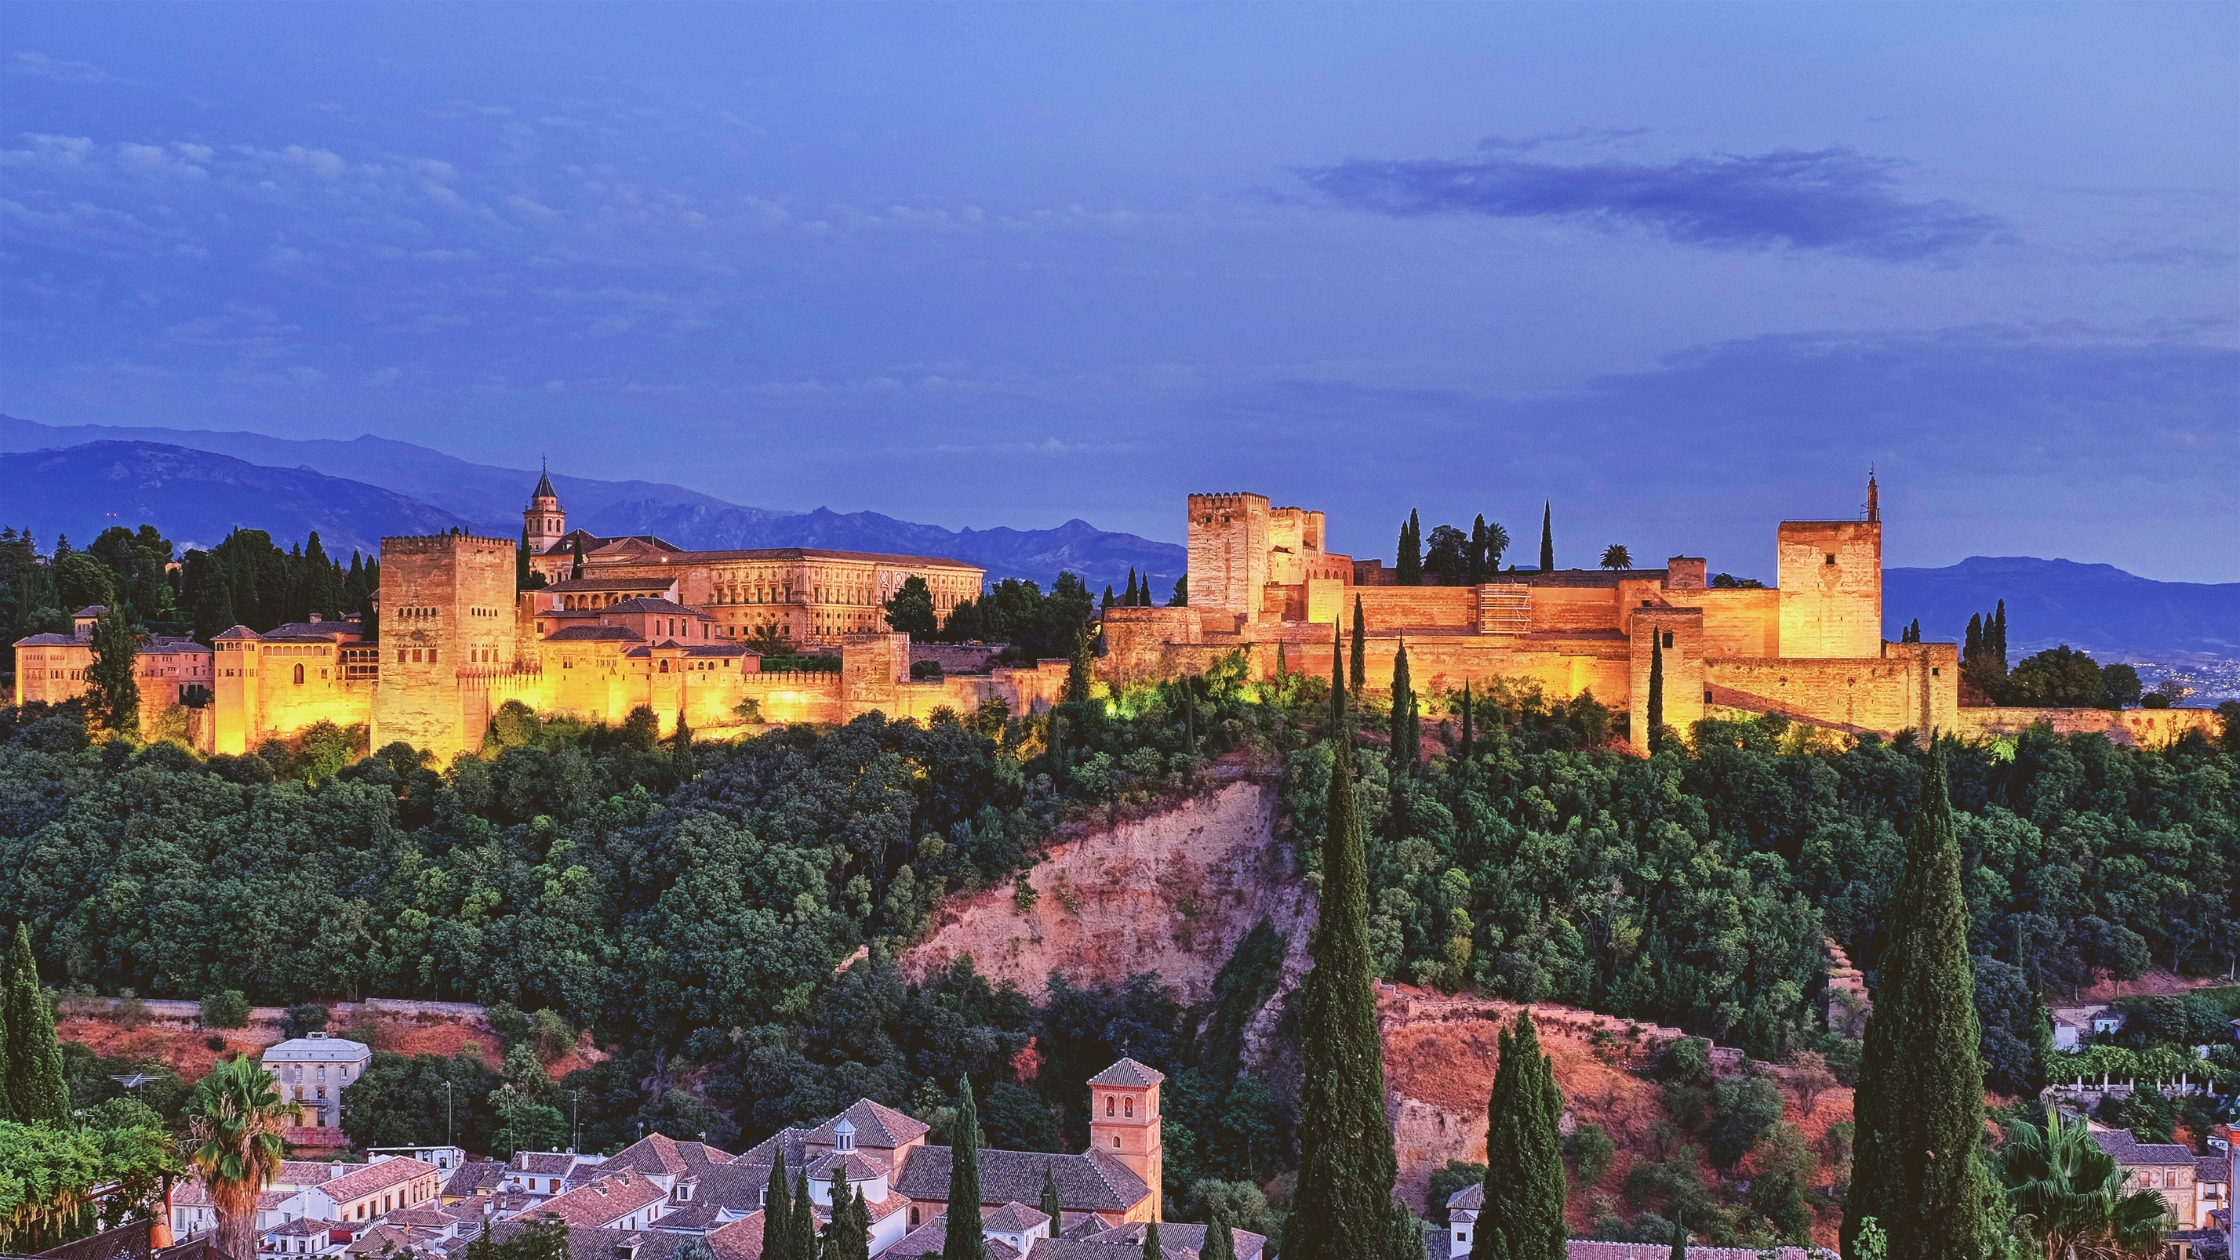 The Alhambra’s Influence on Islamic Art and European Heritage